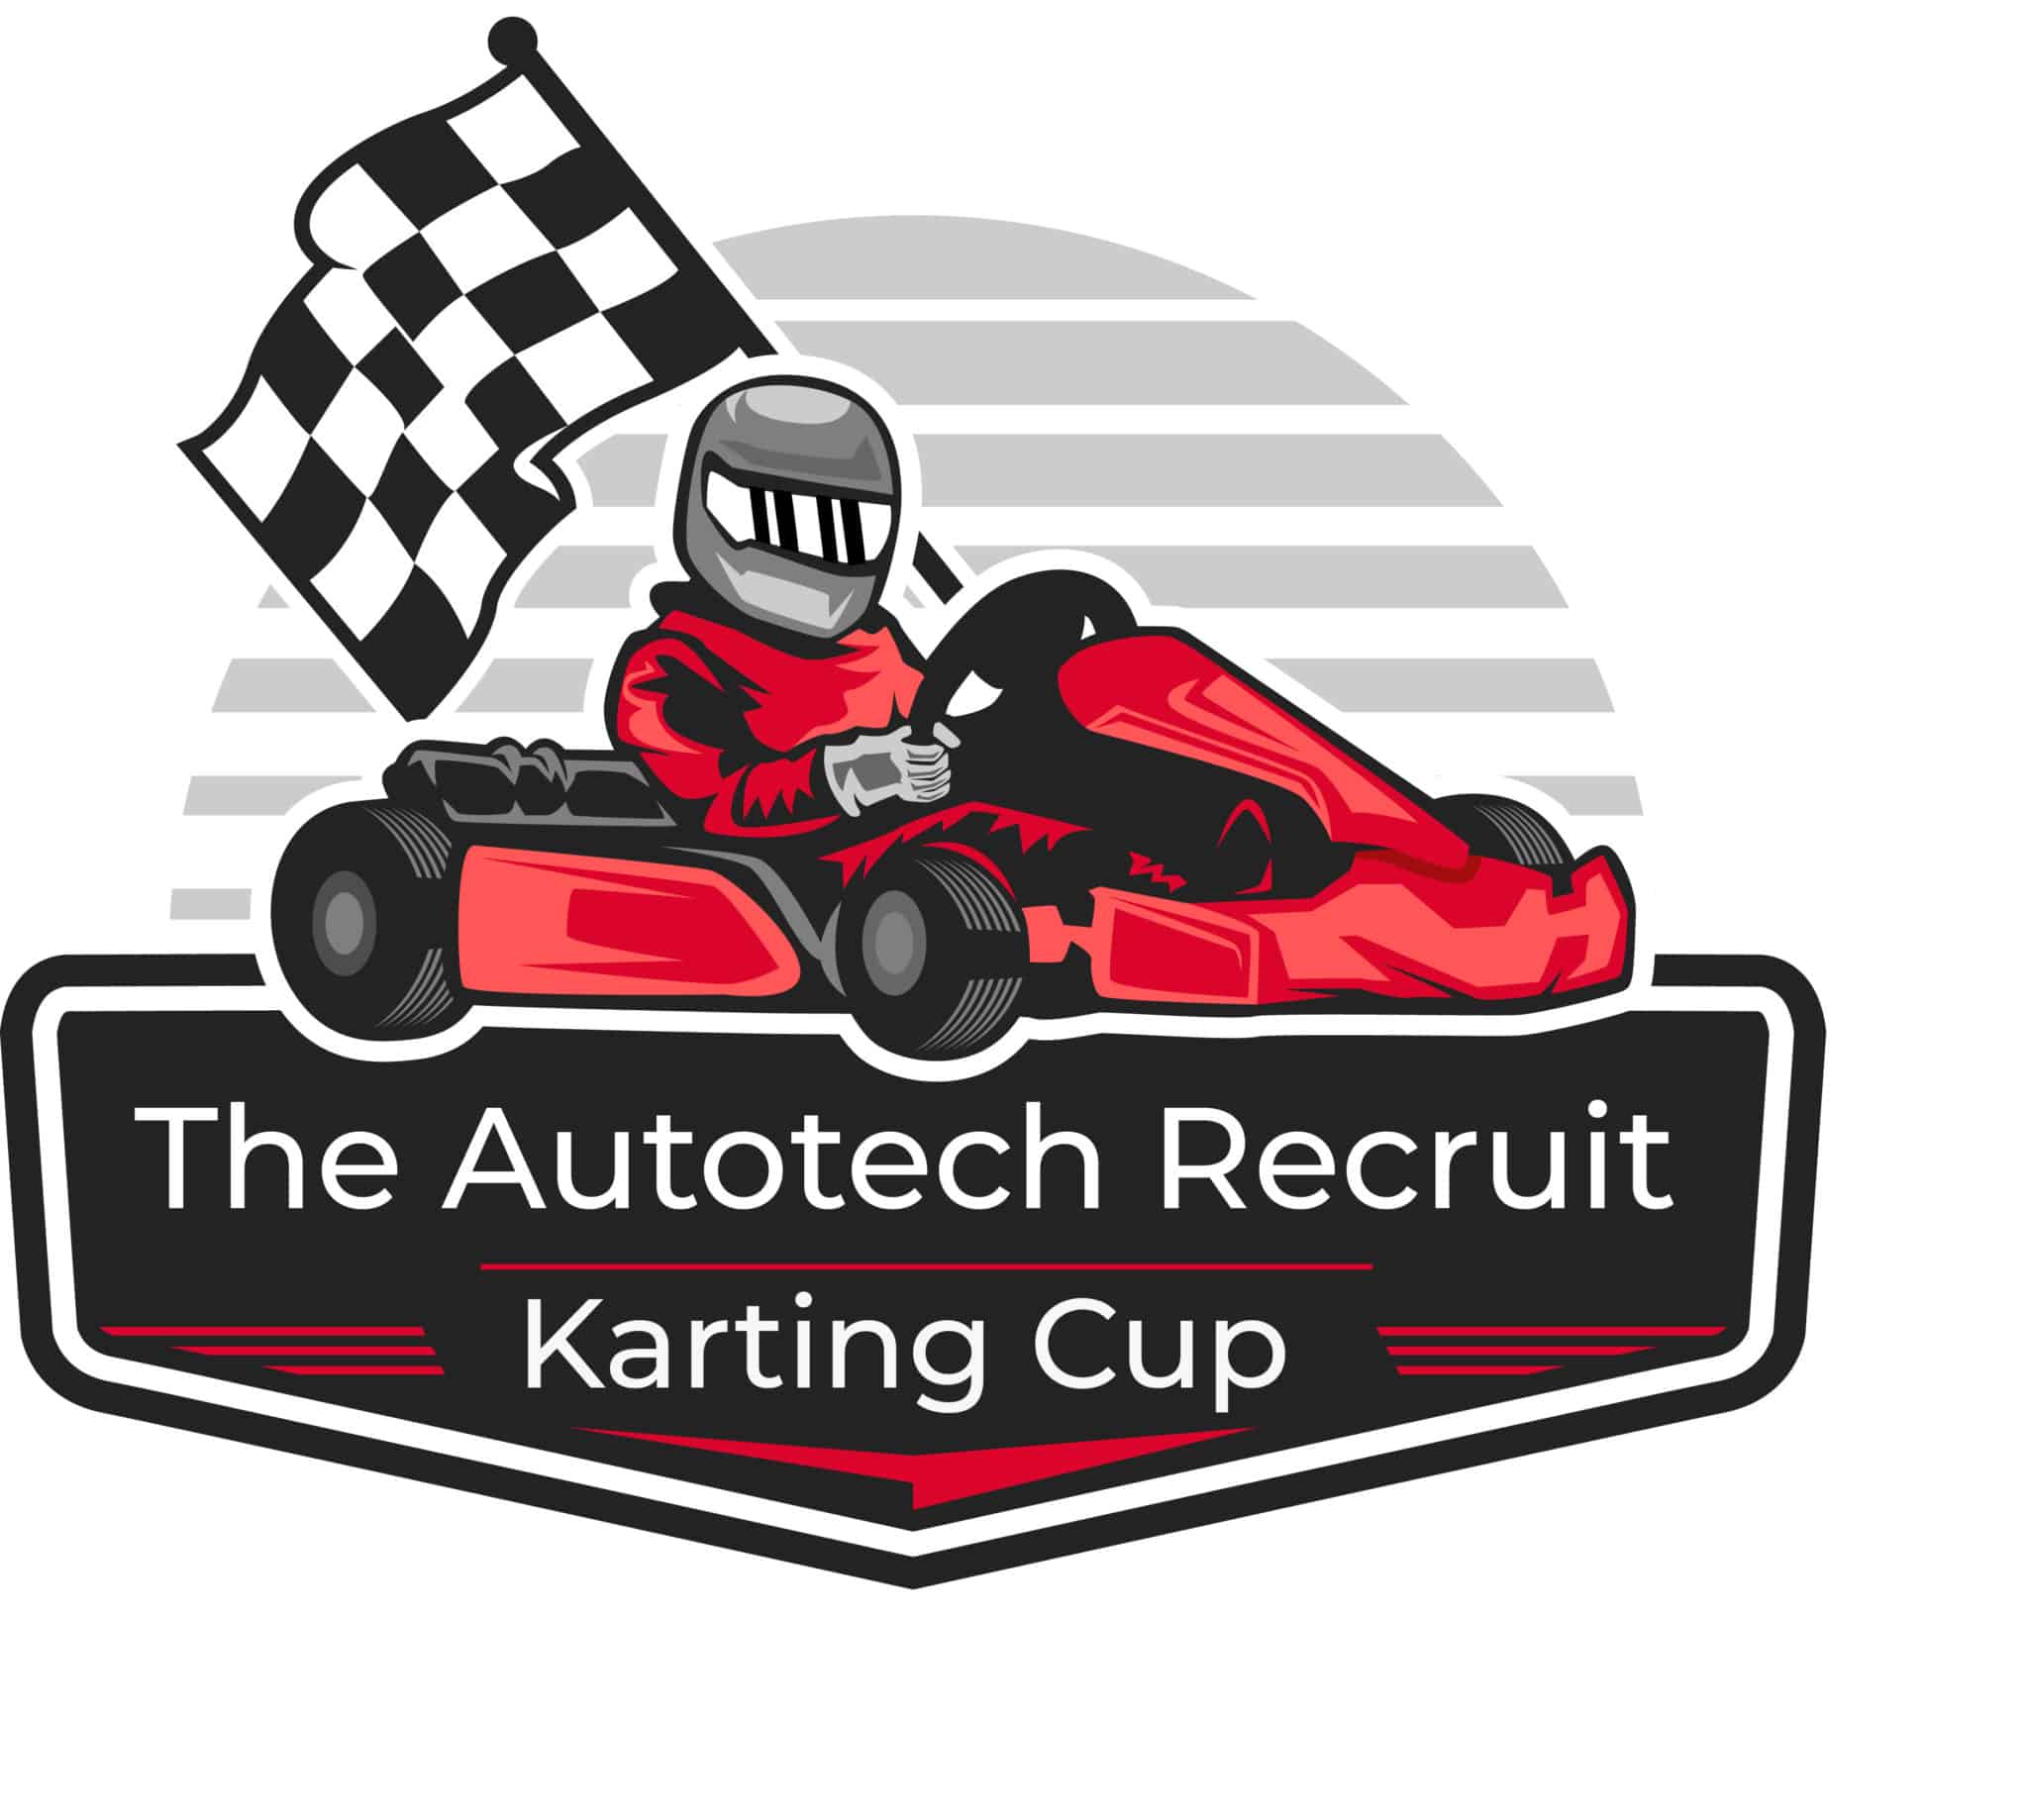 The Autotech Recruit Karting Cup